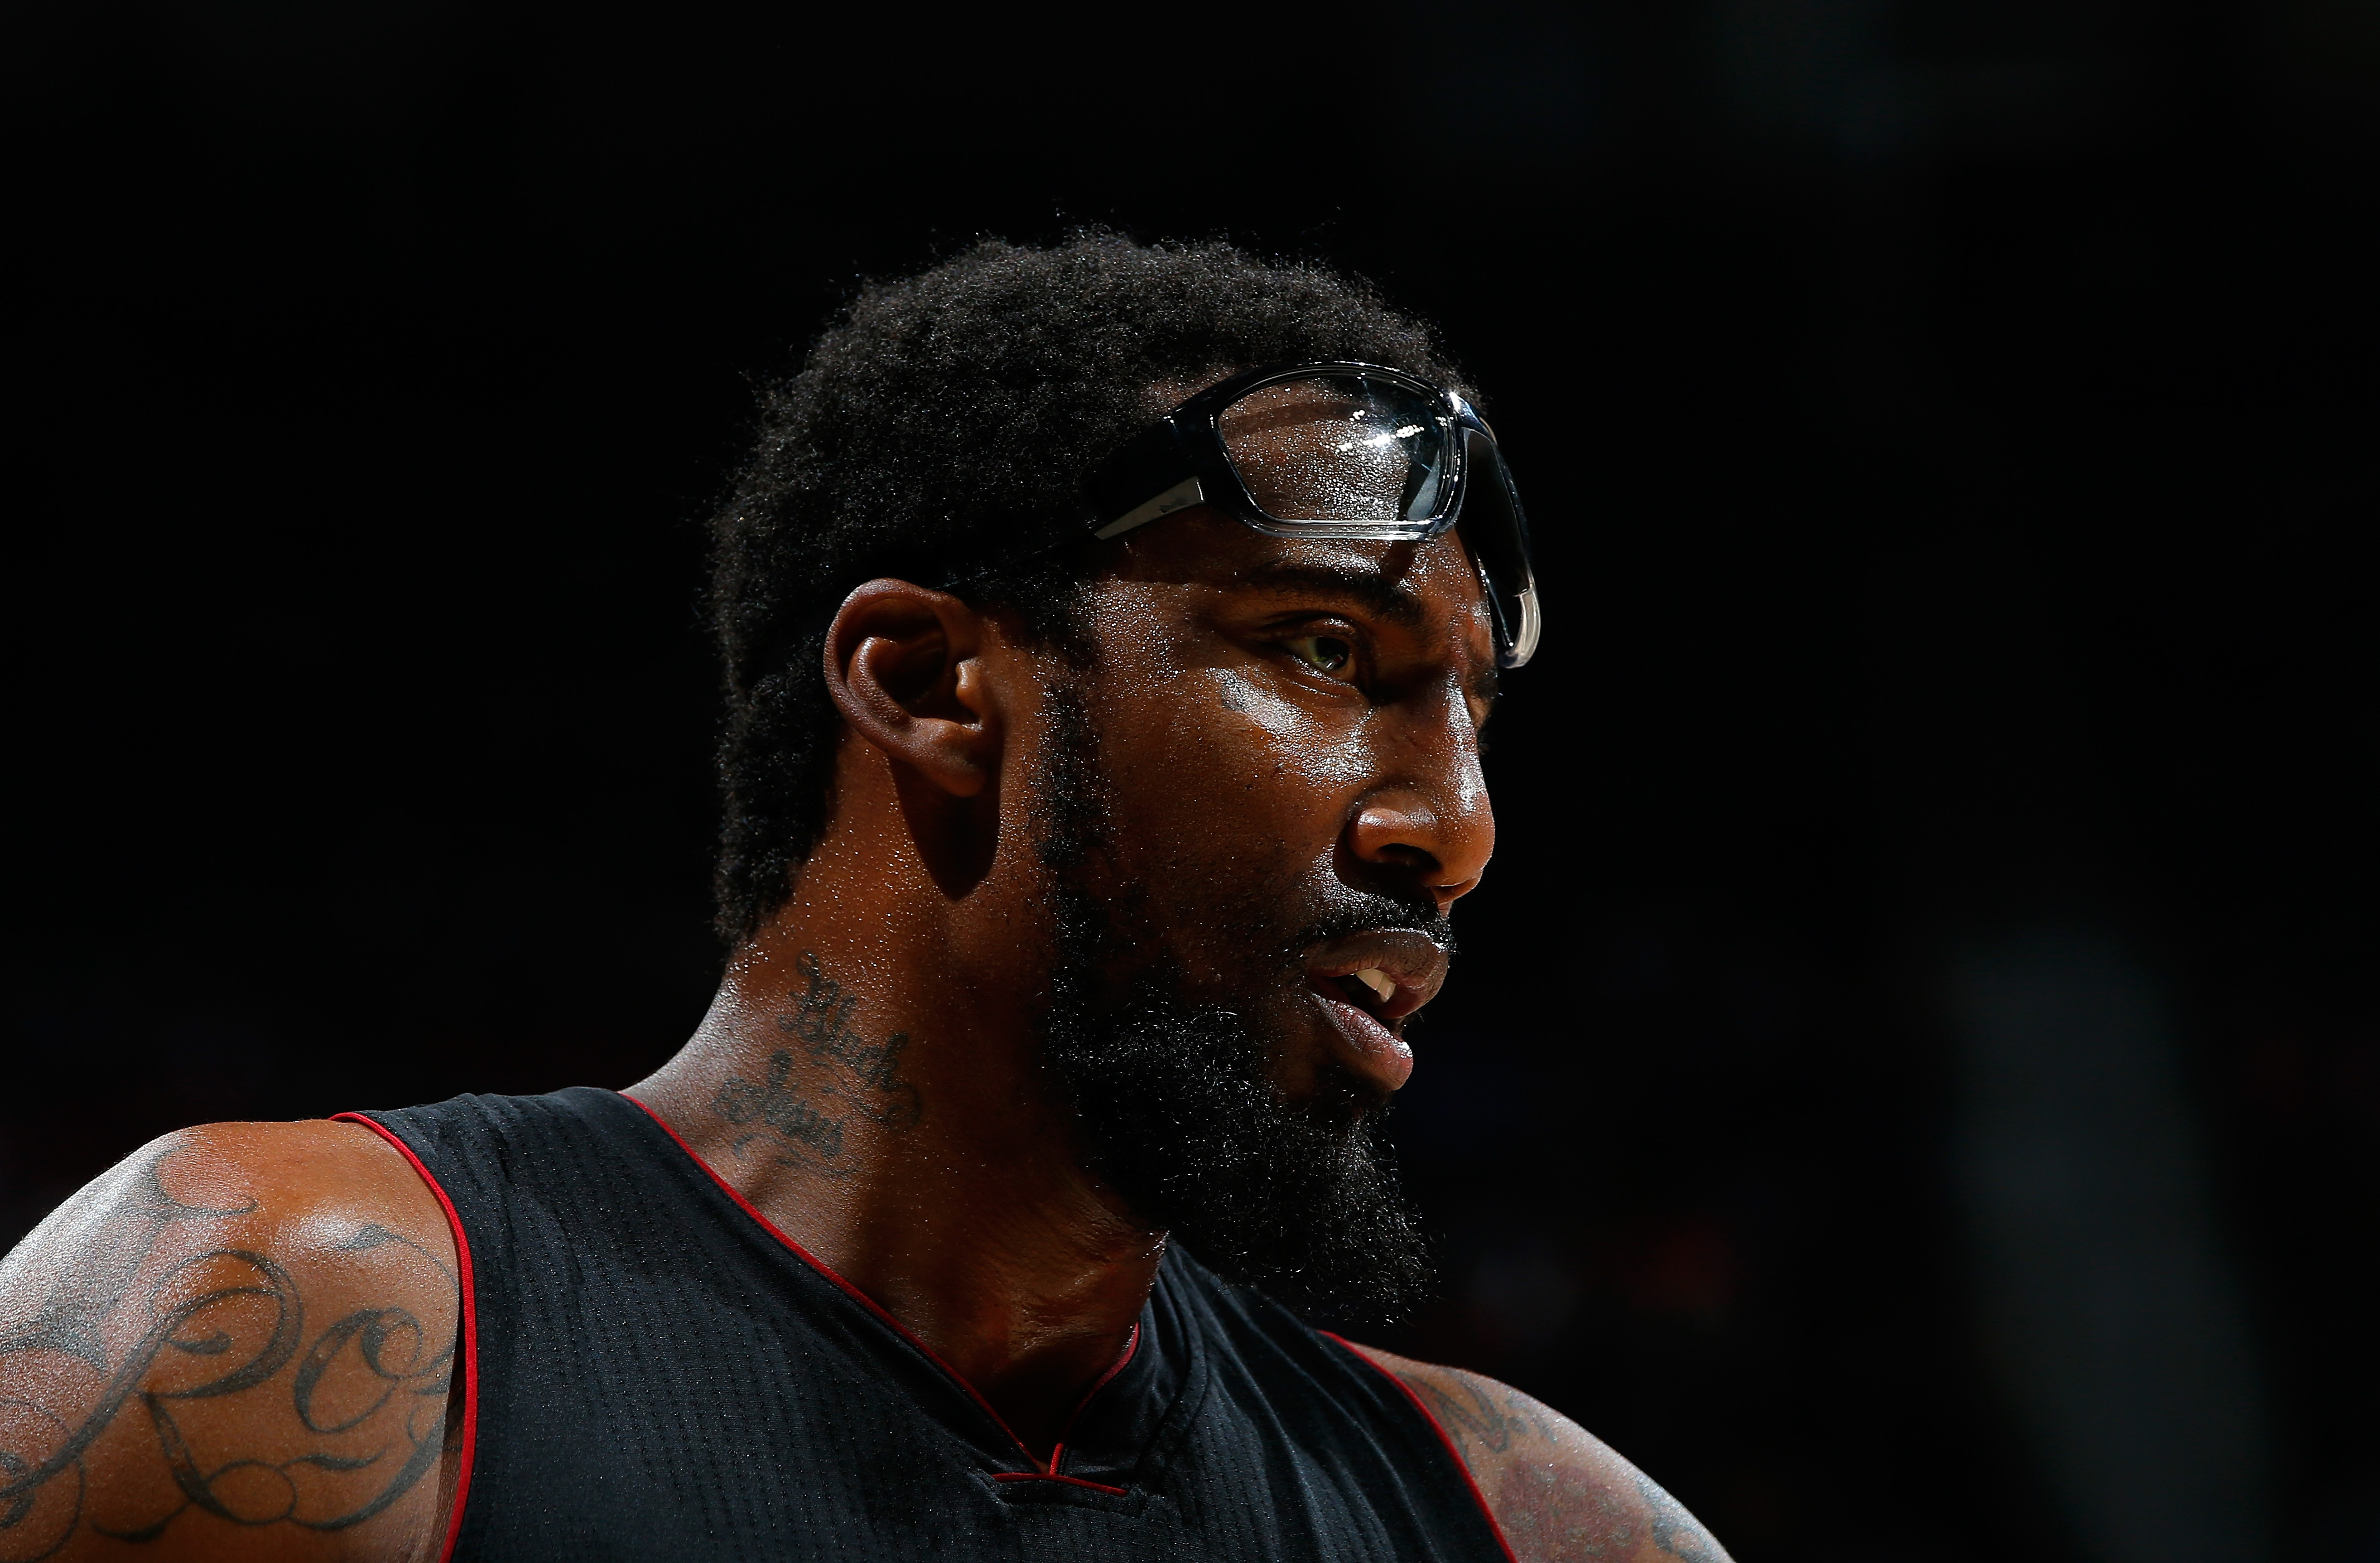 Amar'e Stoudemire to continue basketball career in Israel